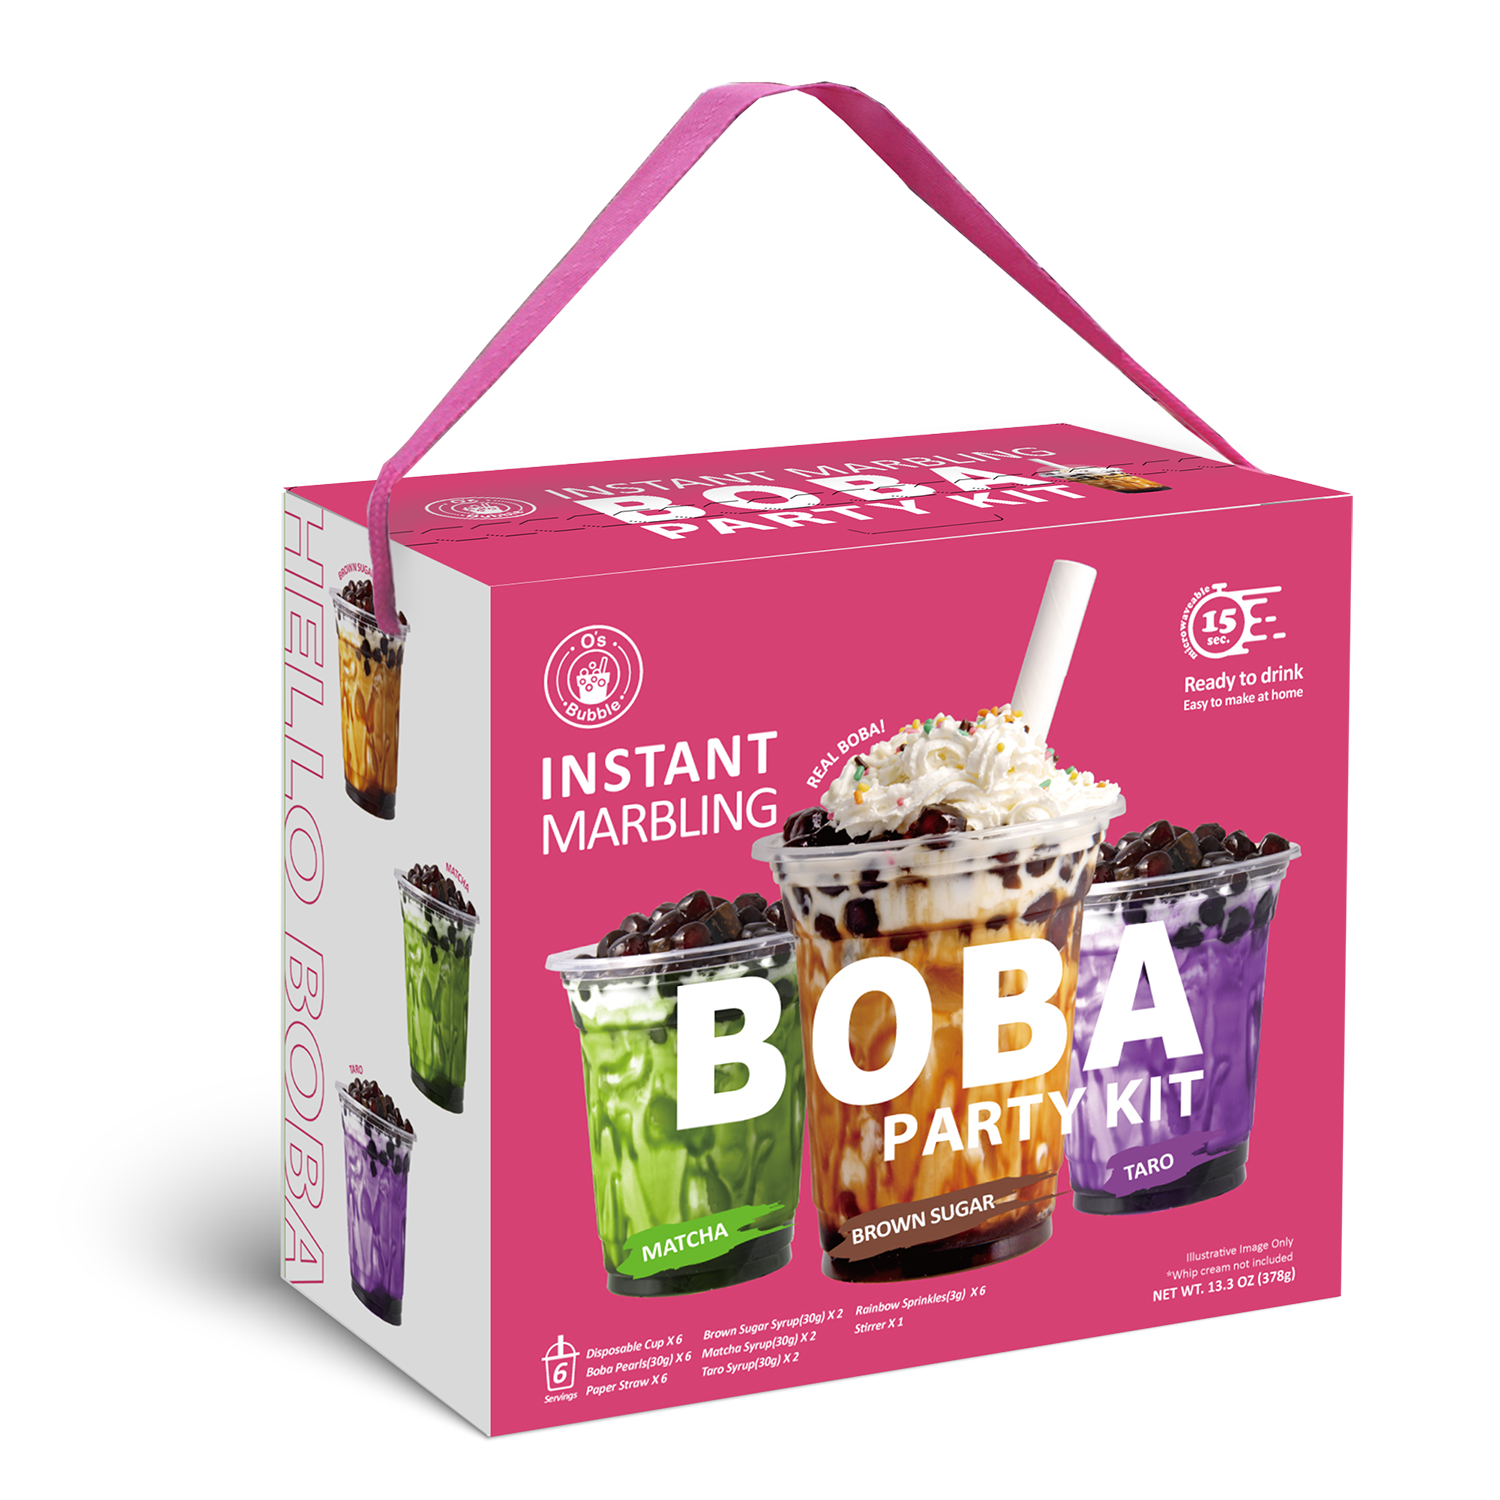 https://www.osbubble.com/wp-content/uploads/2022/08/Marbing_Boba_Party_Kit_box.png